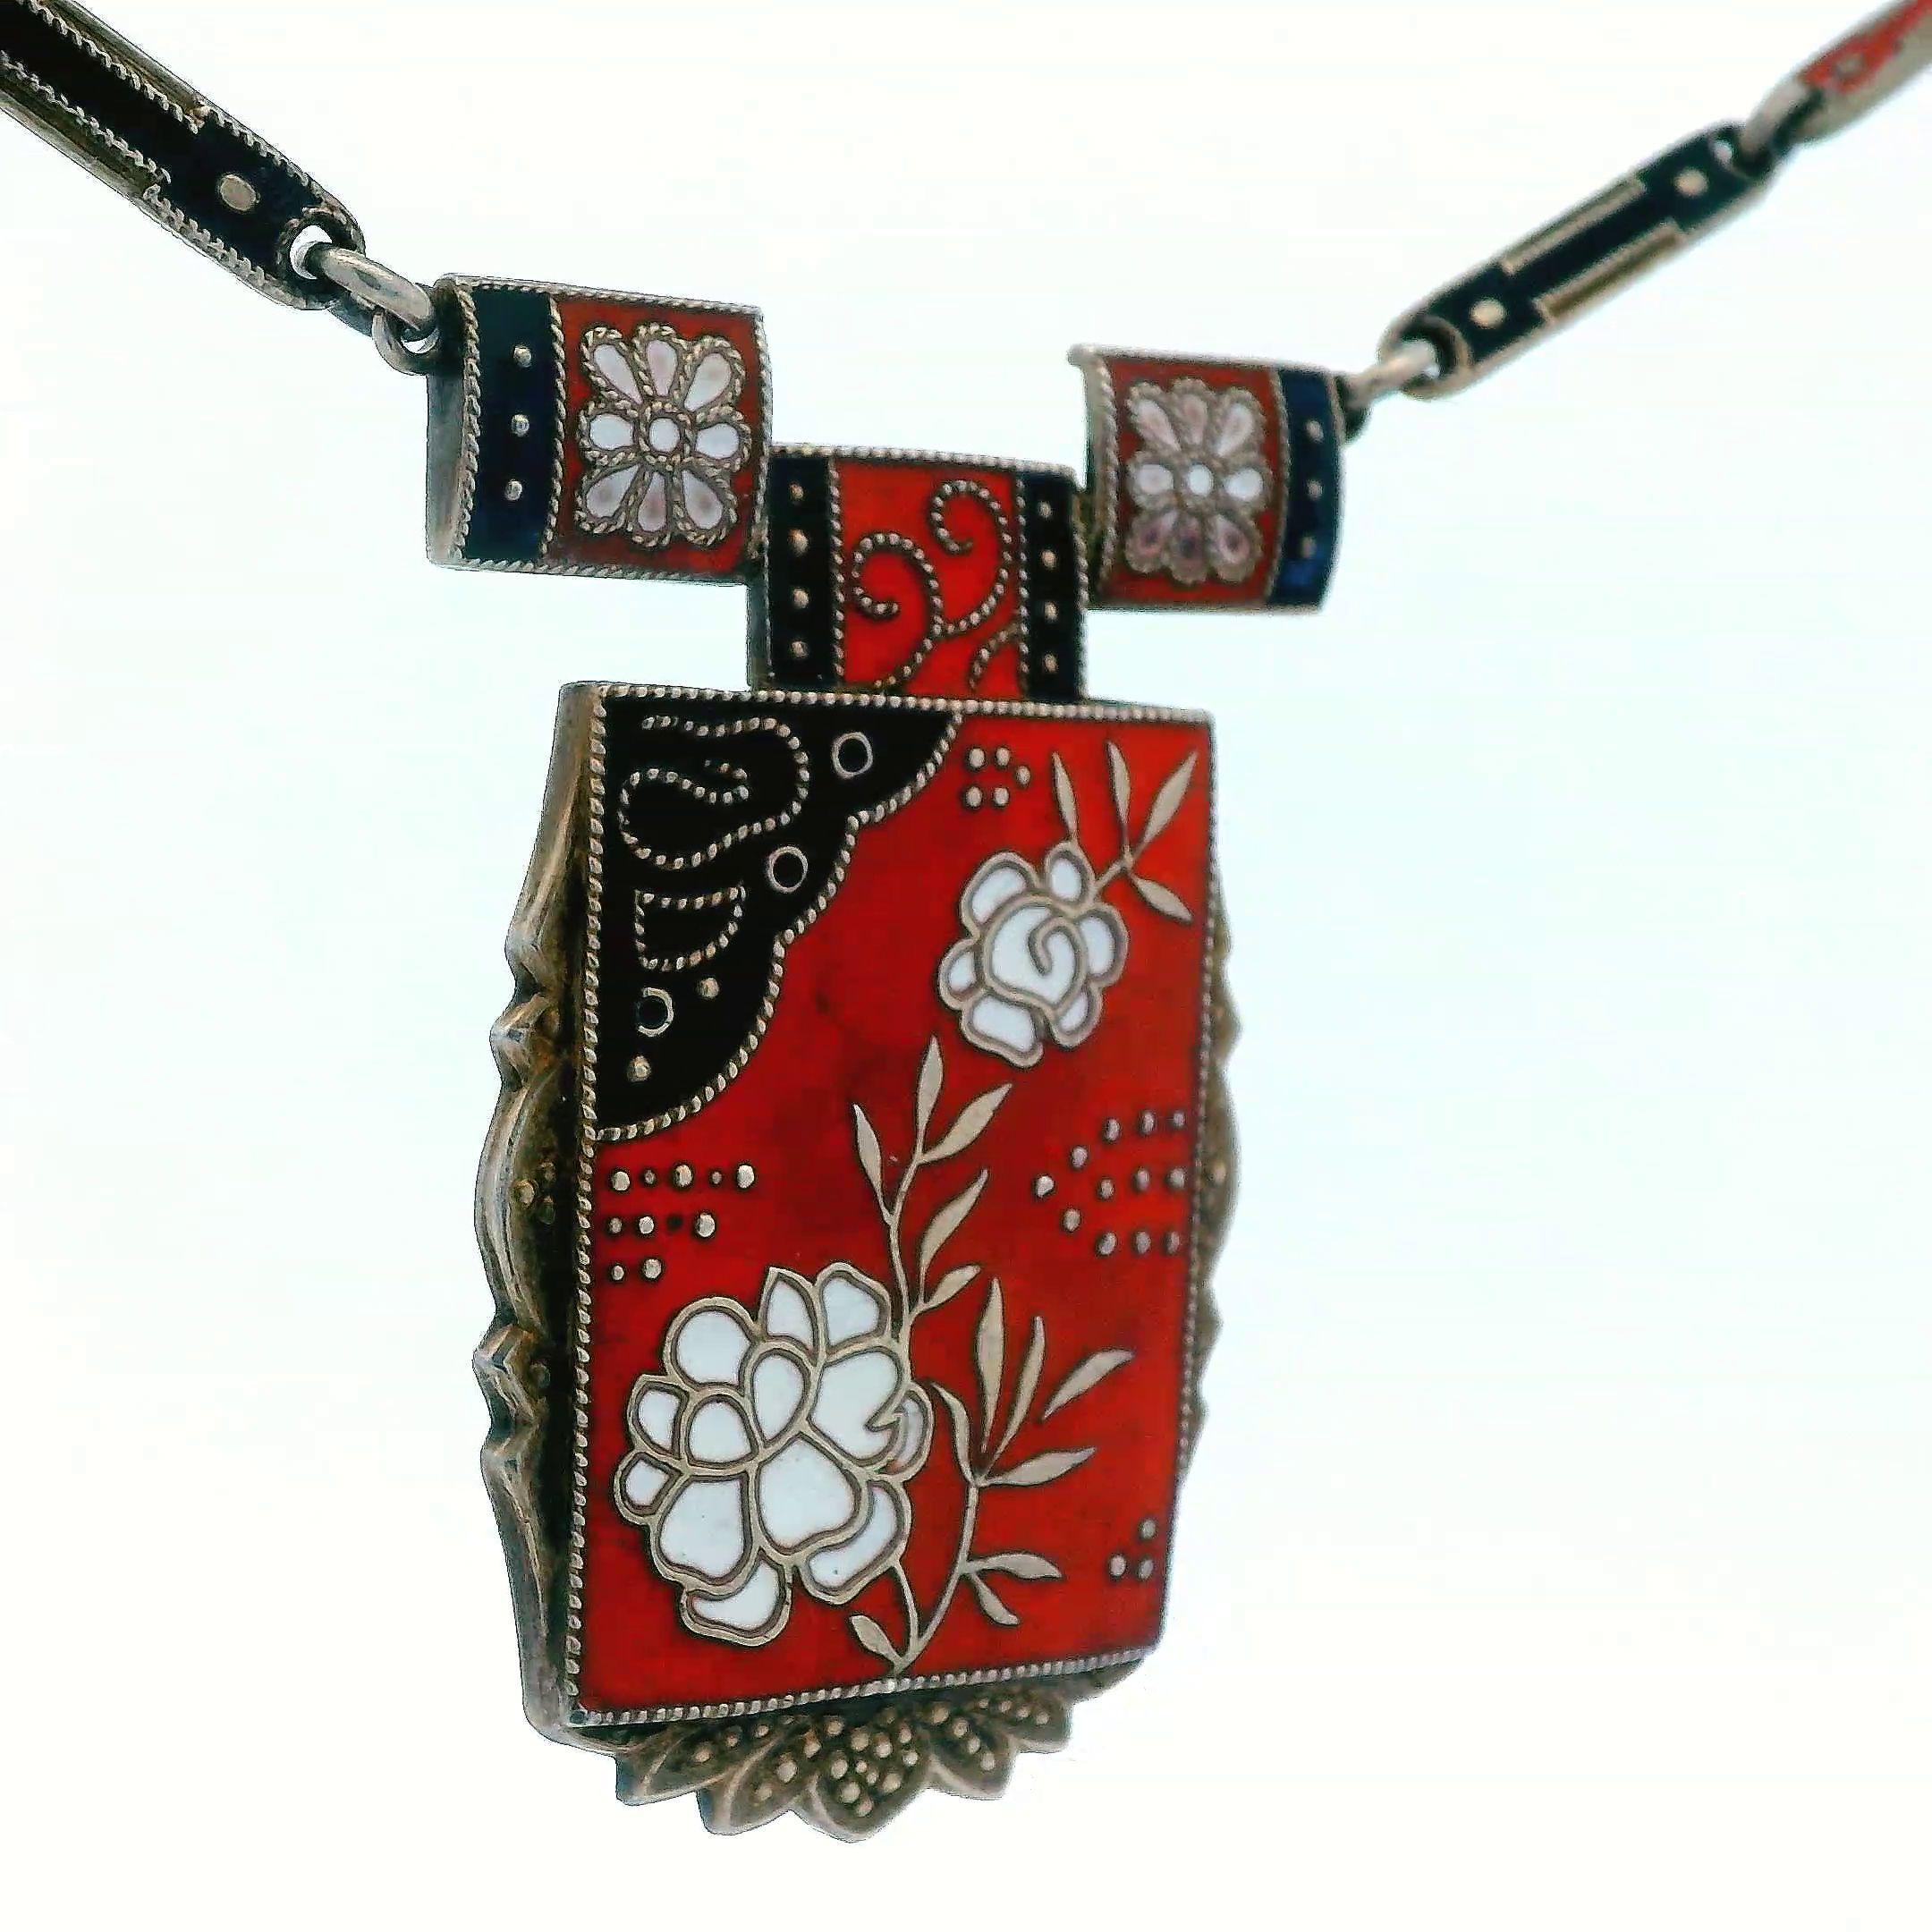 This lovely necklace comes from 1910 Art Noveau and is made in sterling silver with red, black and white enamel. This necklace is special because of the in depth flower portraits with vivid details made possible by the gorgeous enamel colors. This